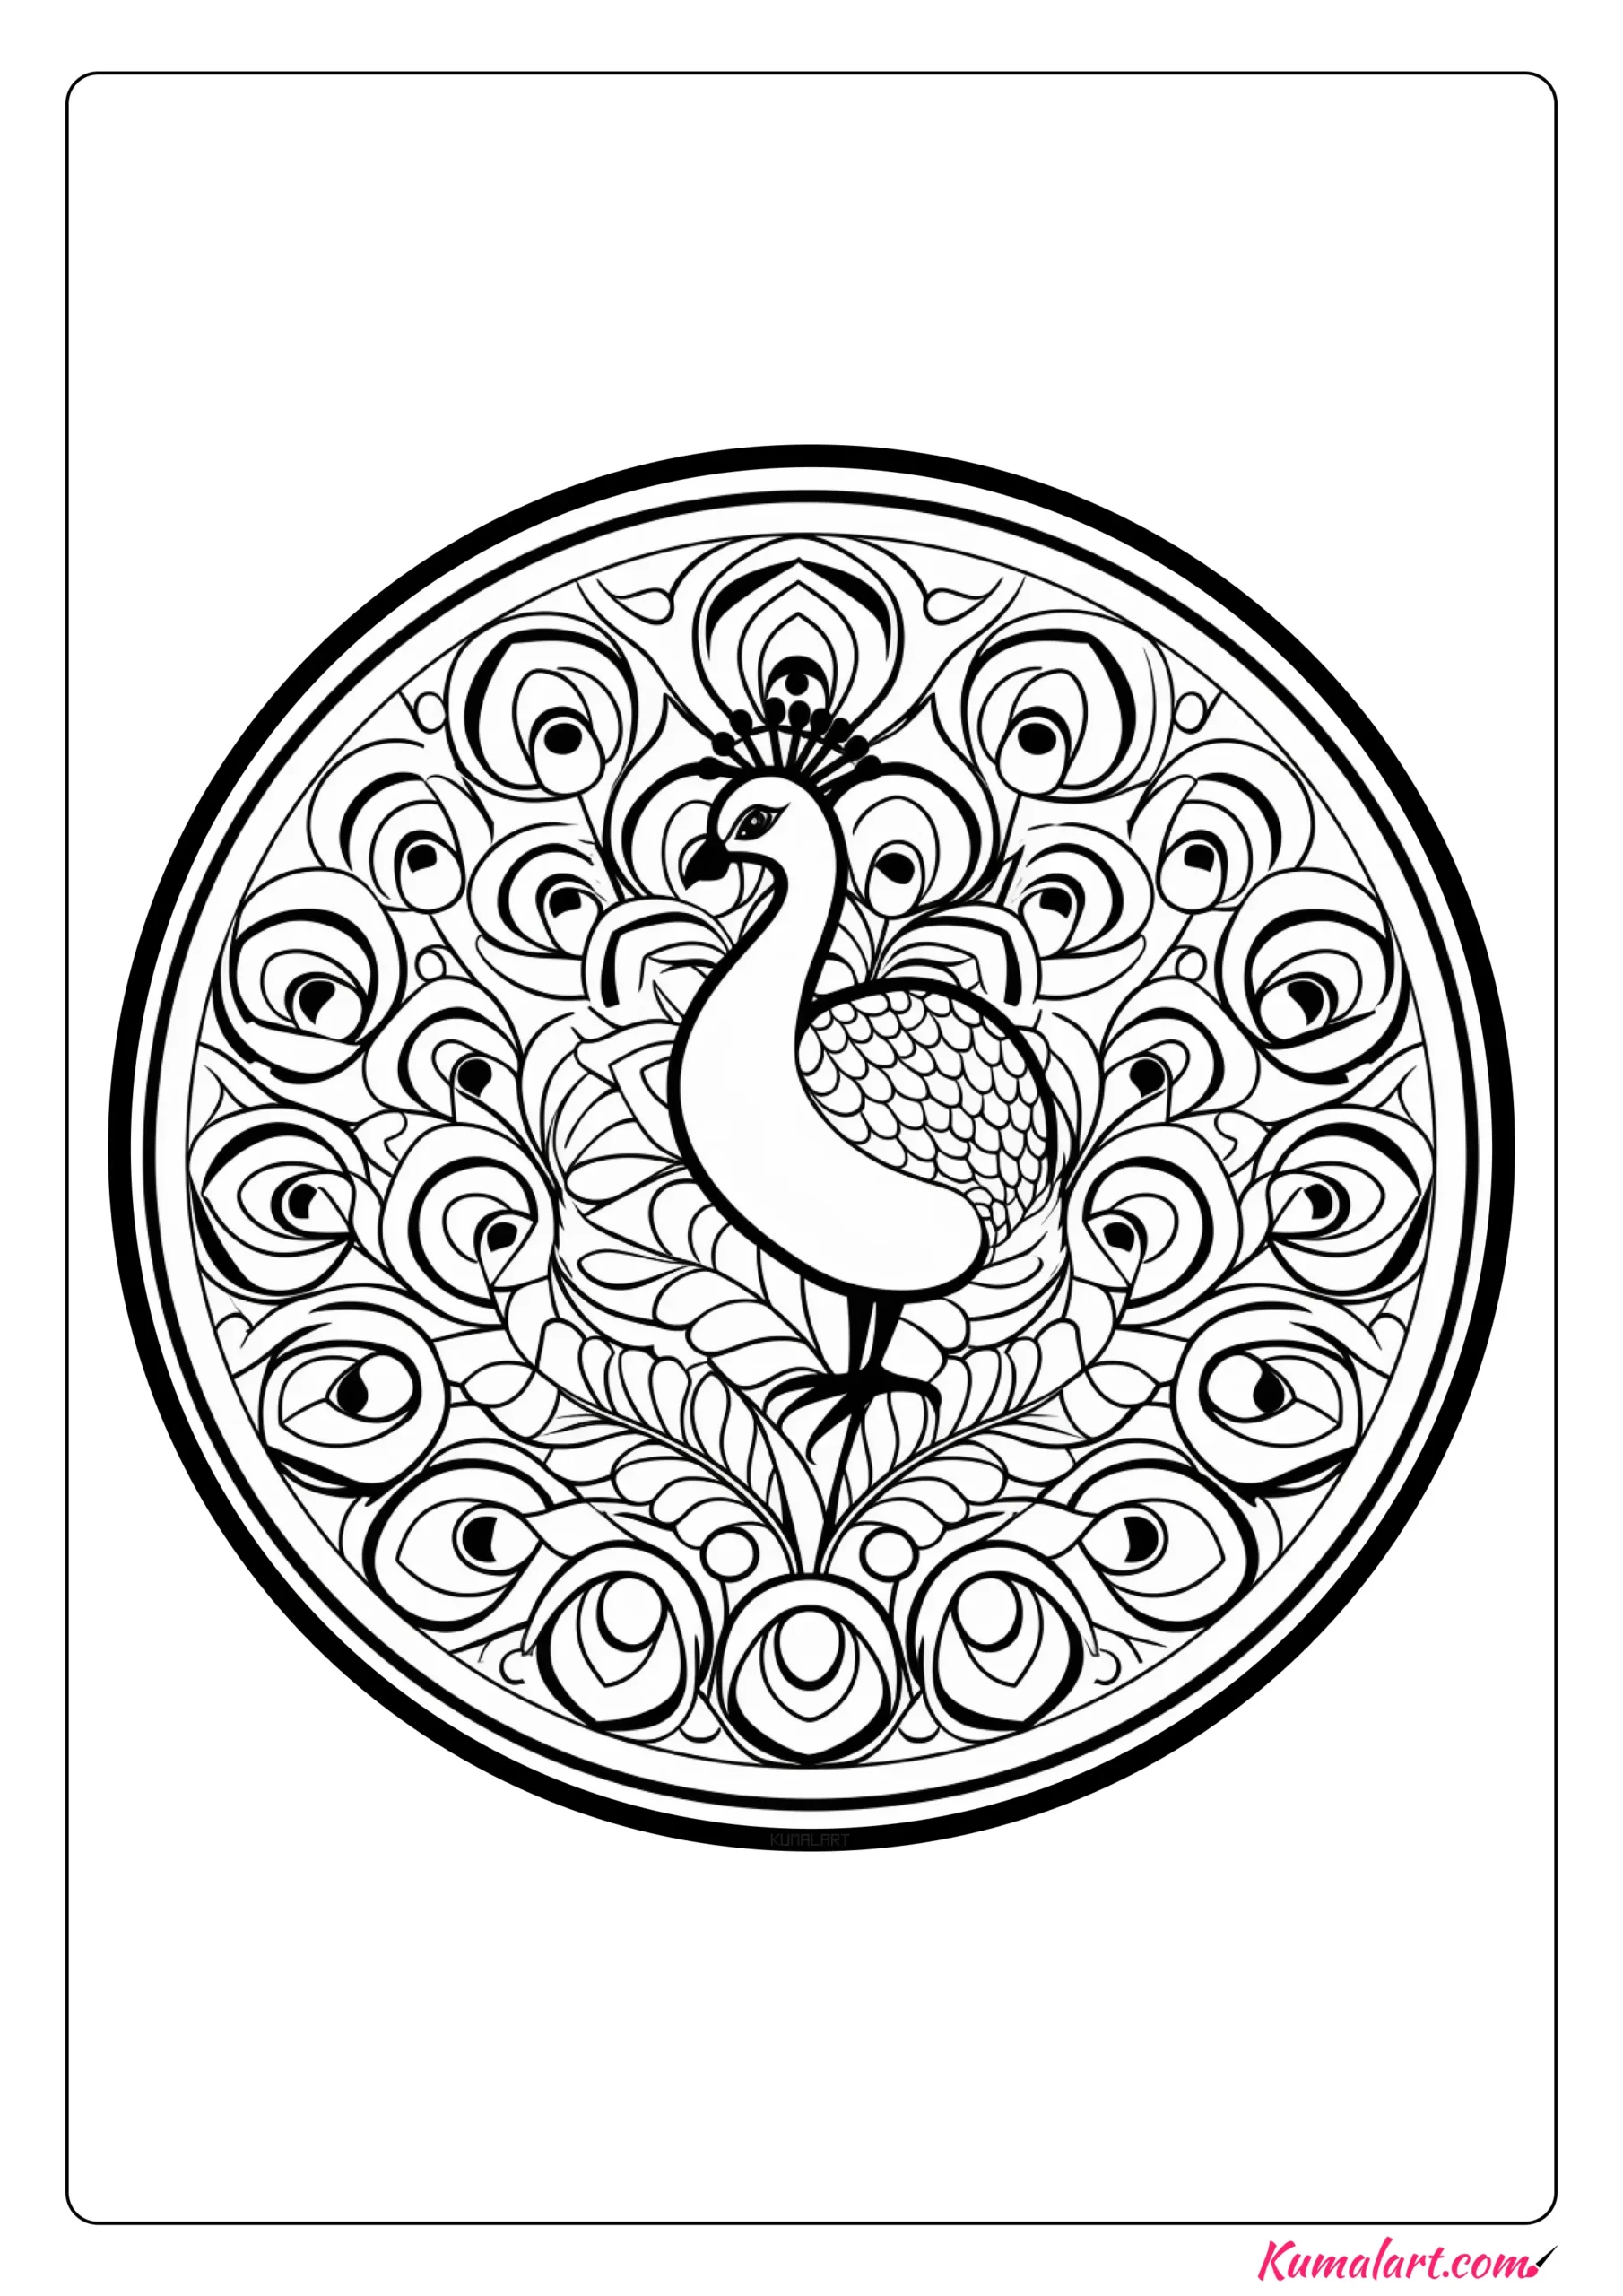 Lucy the Peacock Mandala Coloring Page